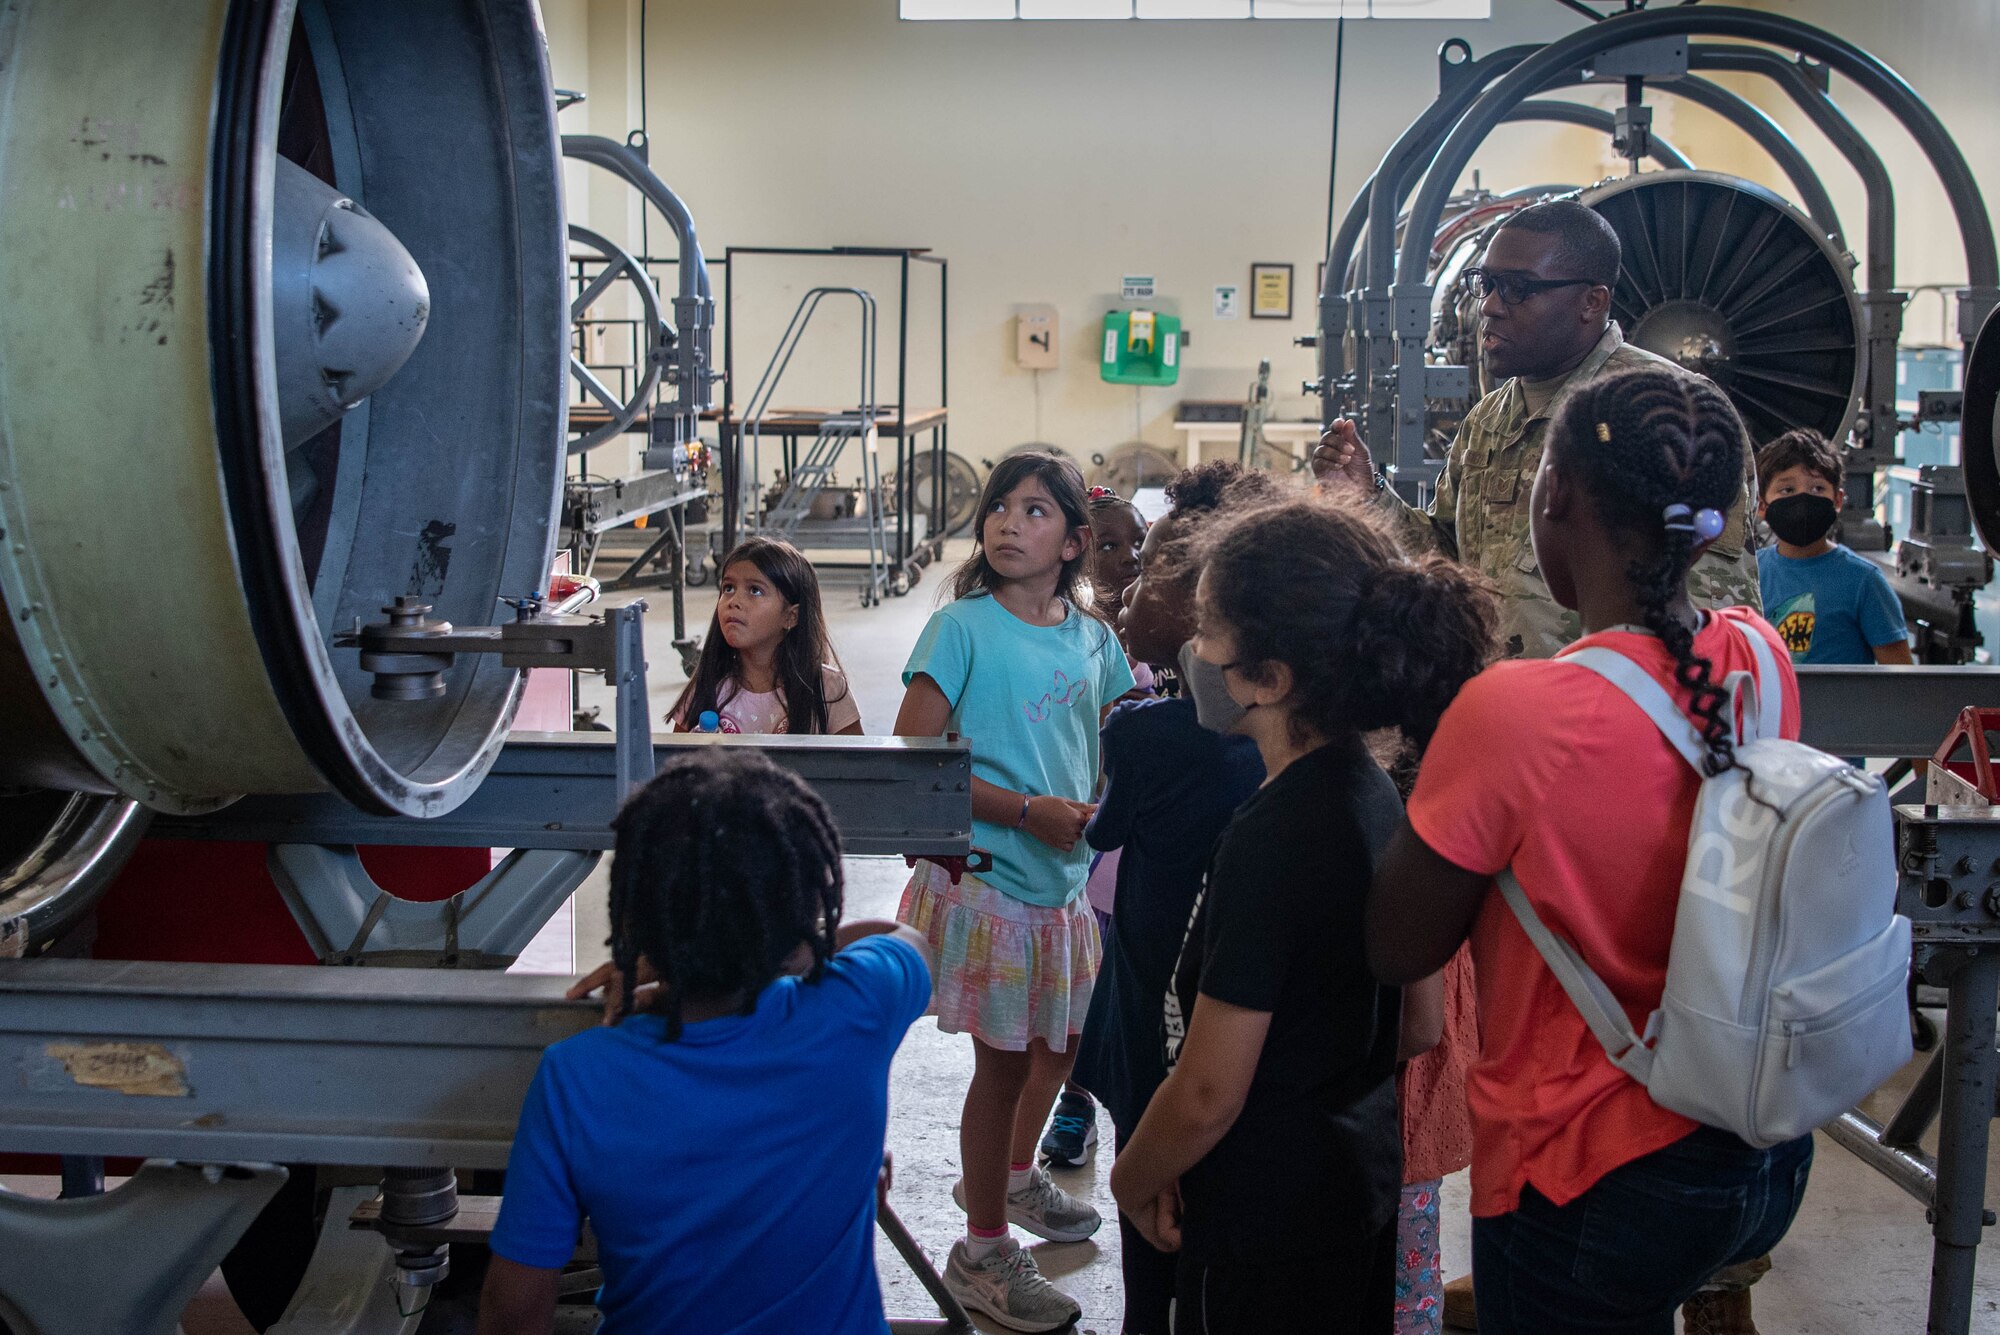 Students gather around an engine while an Airman gives a presentation.